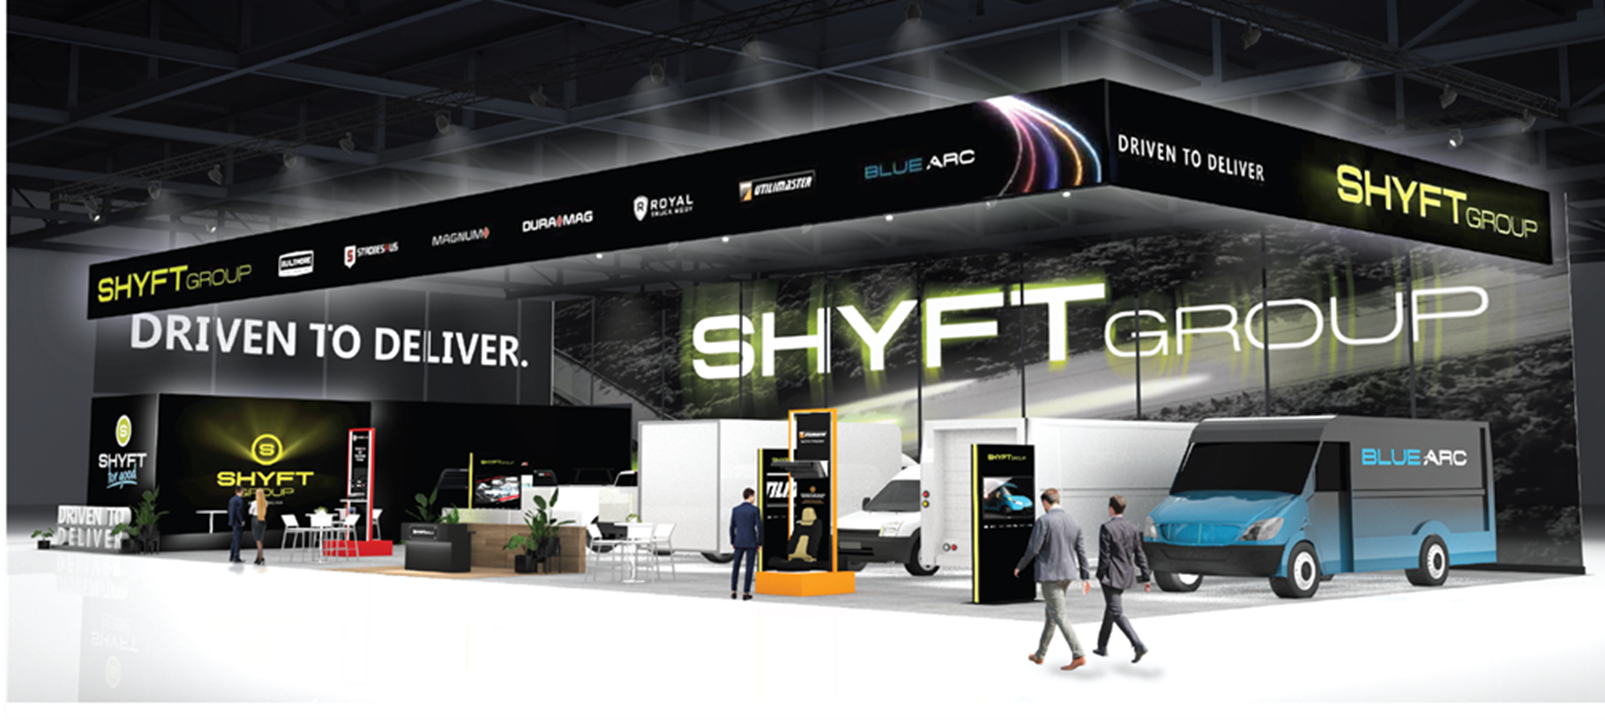 The Shyft Group to Showcase Innovation and CustomerCentric Solutions